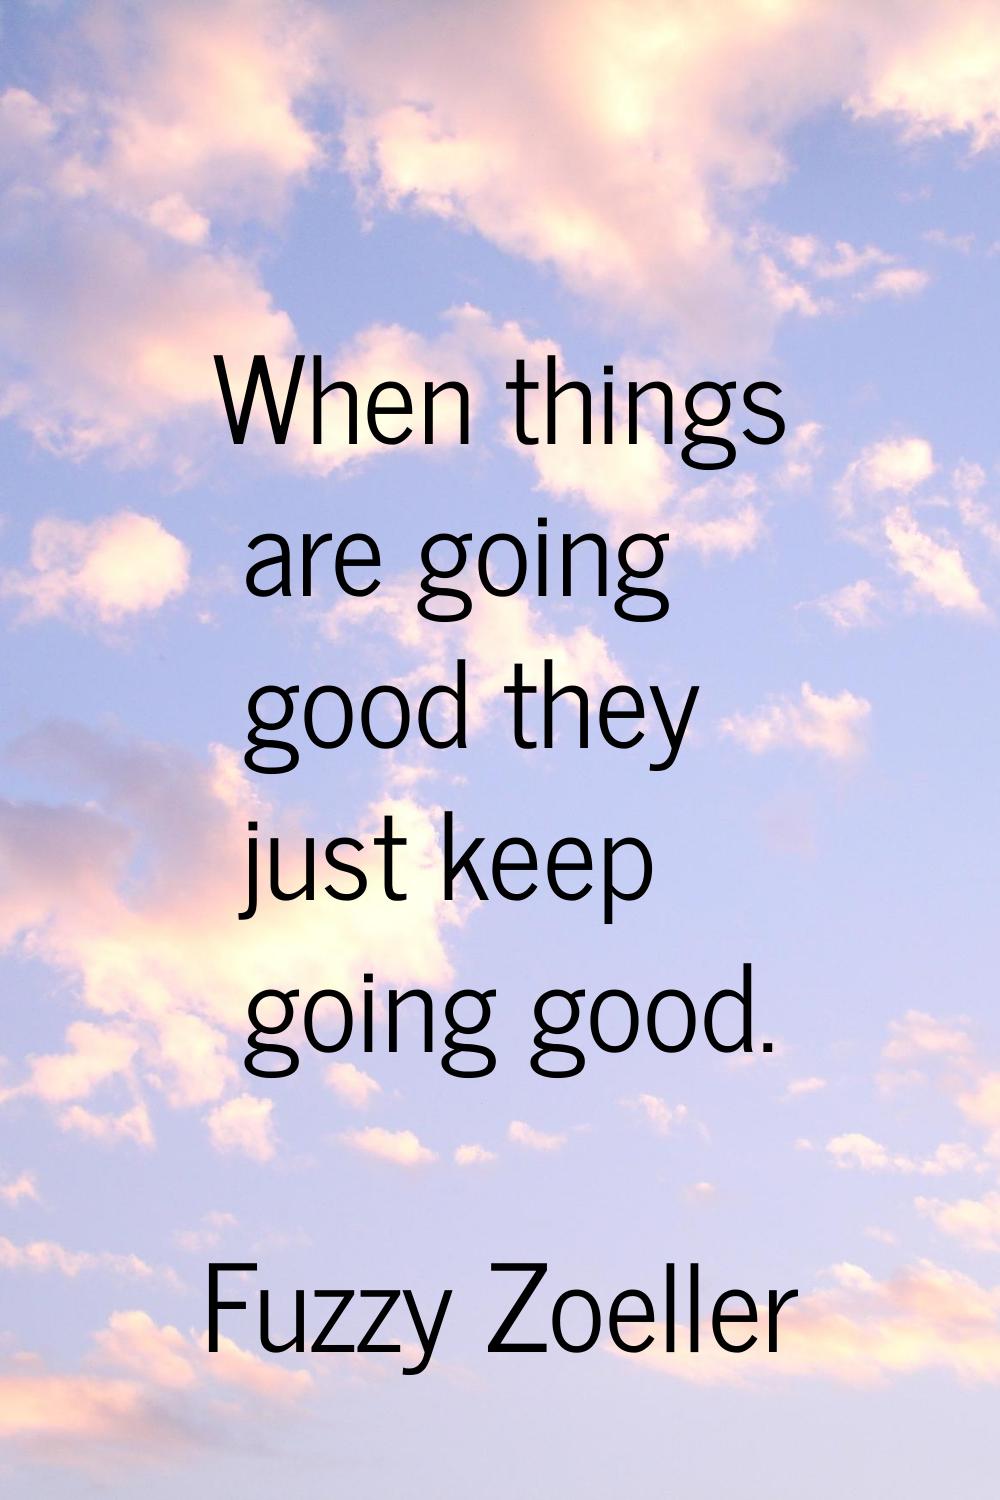 When things are going good they just keep going good.